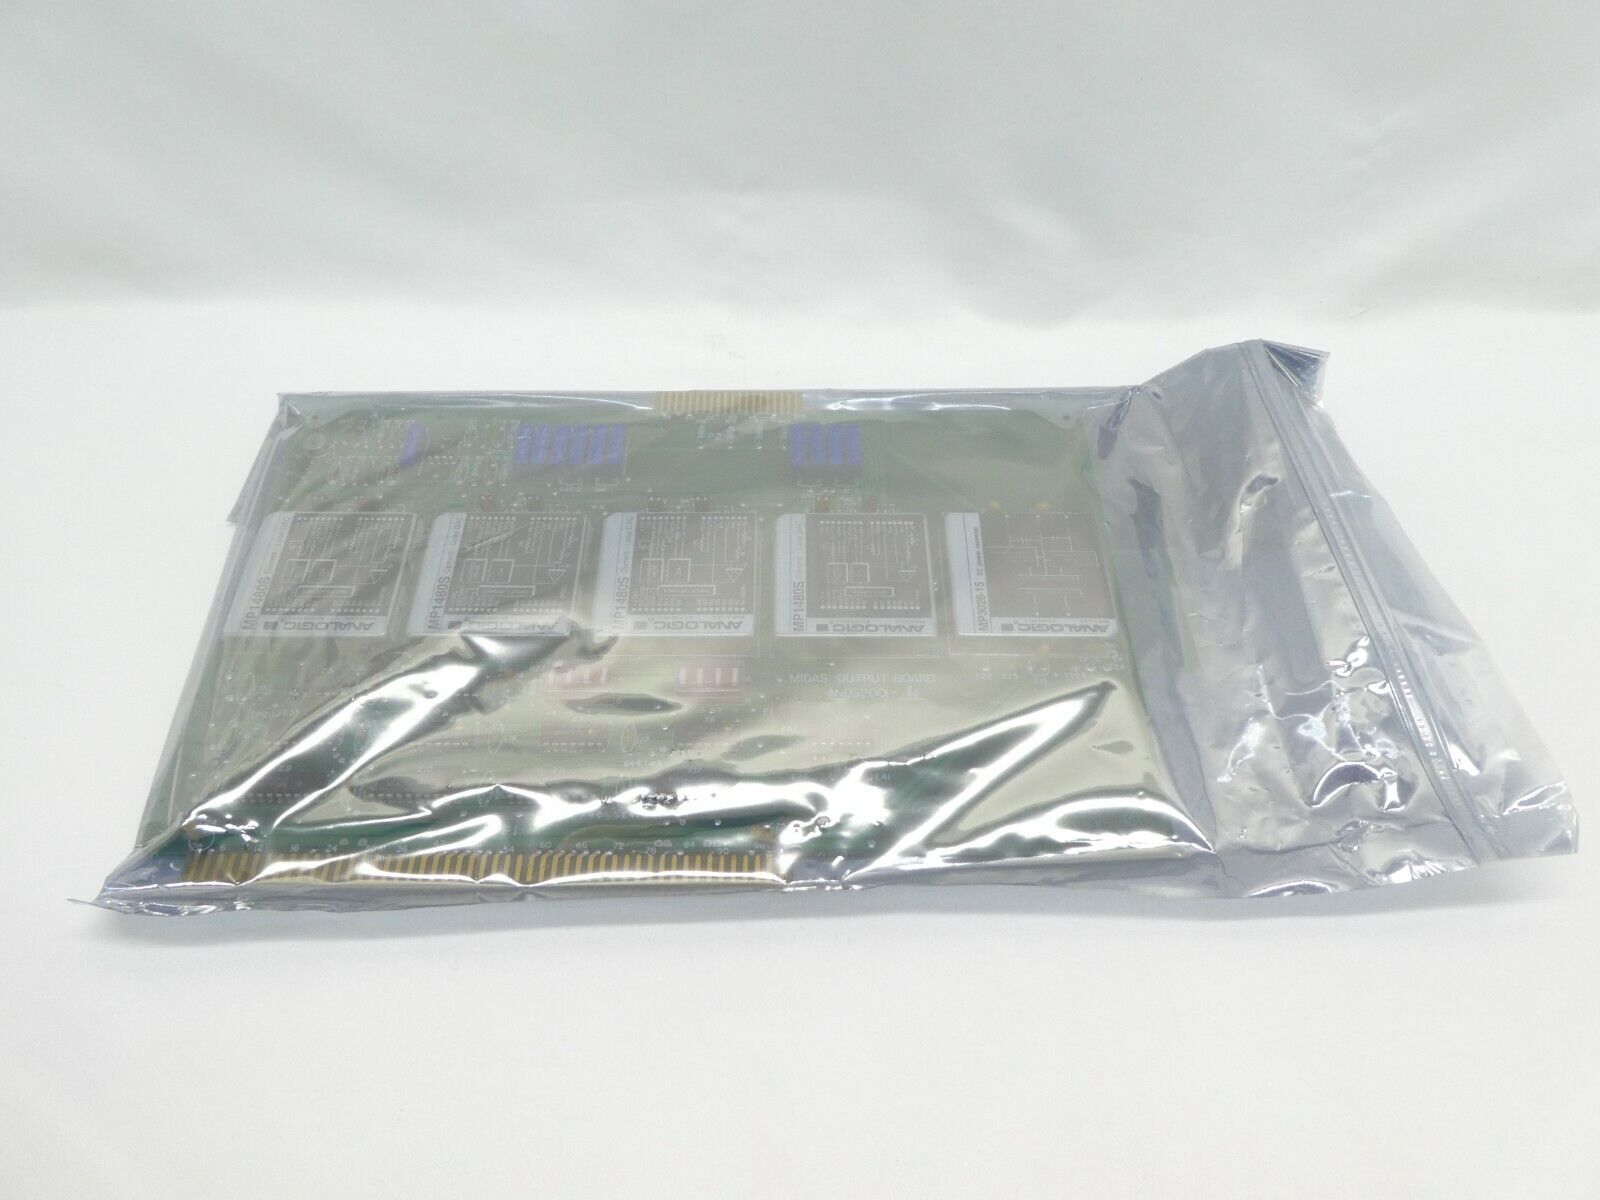 Analogic D4-8624 Midas Output PCB ANDS2001-4 Varian VSEA 10-8624-004 New Surplus